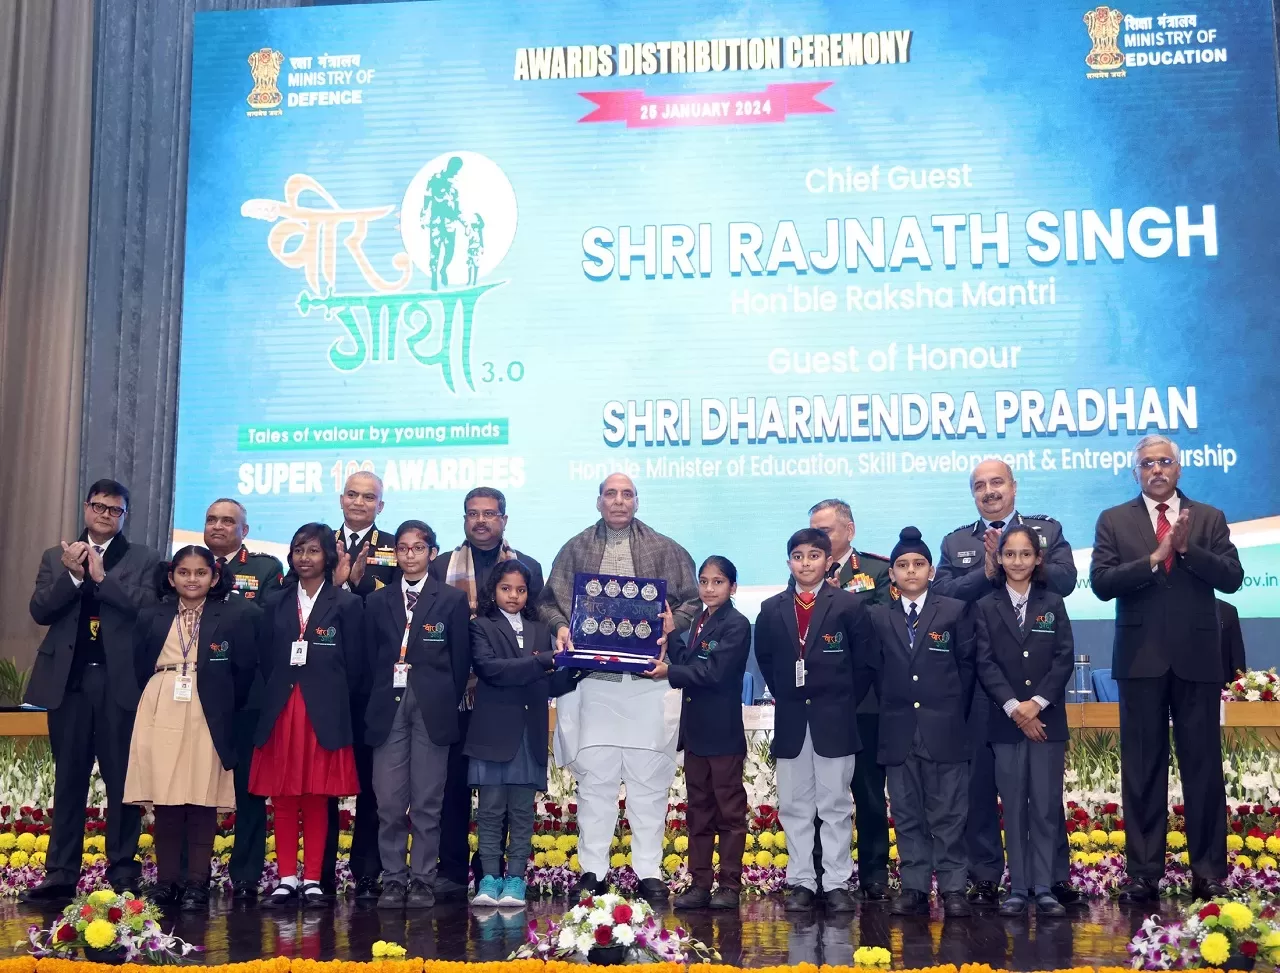 The Union Minister for Defence, Shri Rajnath Singh felicitated medals and a certificate to Super-100 winners of Project Veer Gatha 3.0 during the Awards Distribution Ceremony, in New Delhi on January 25, 2024.